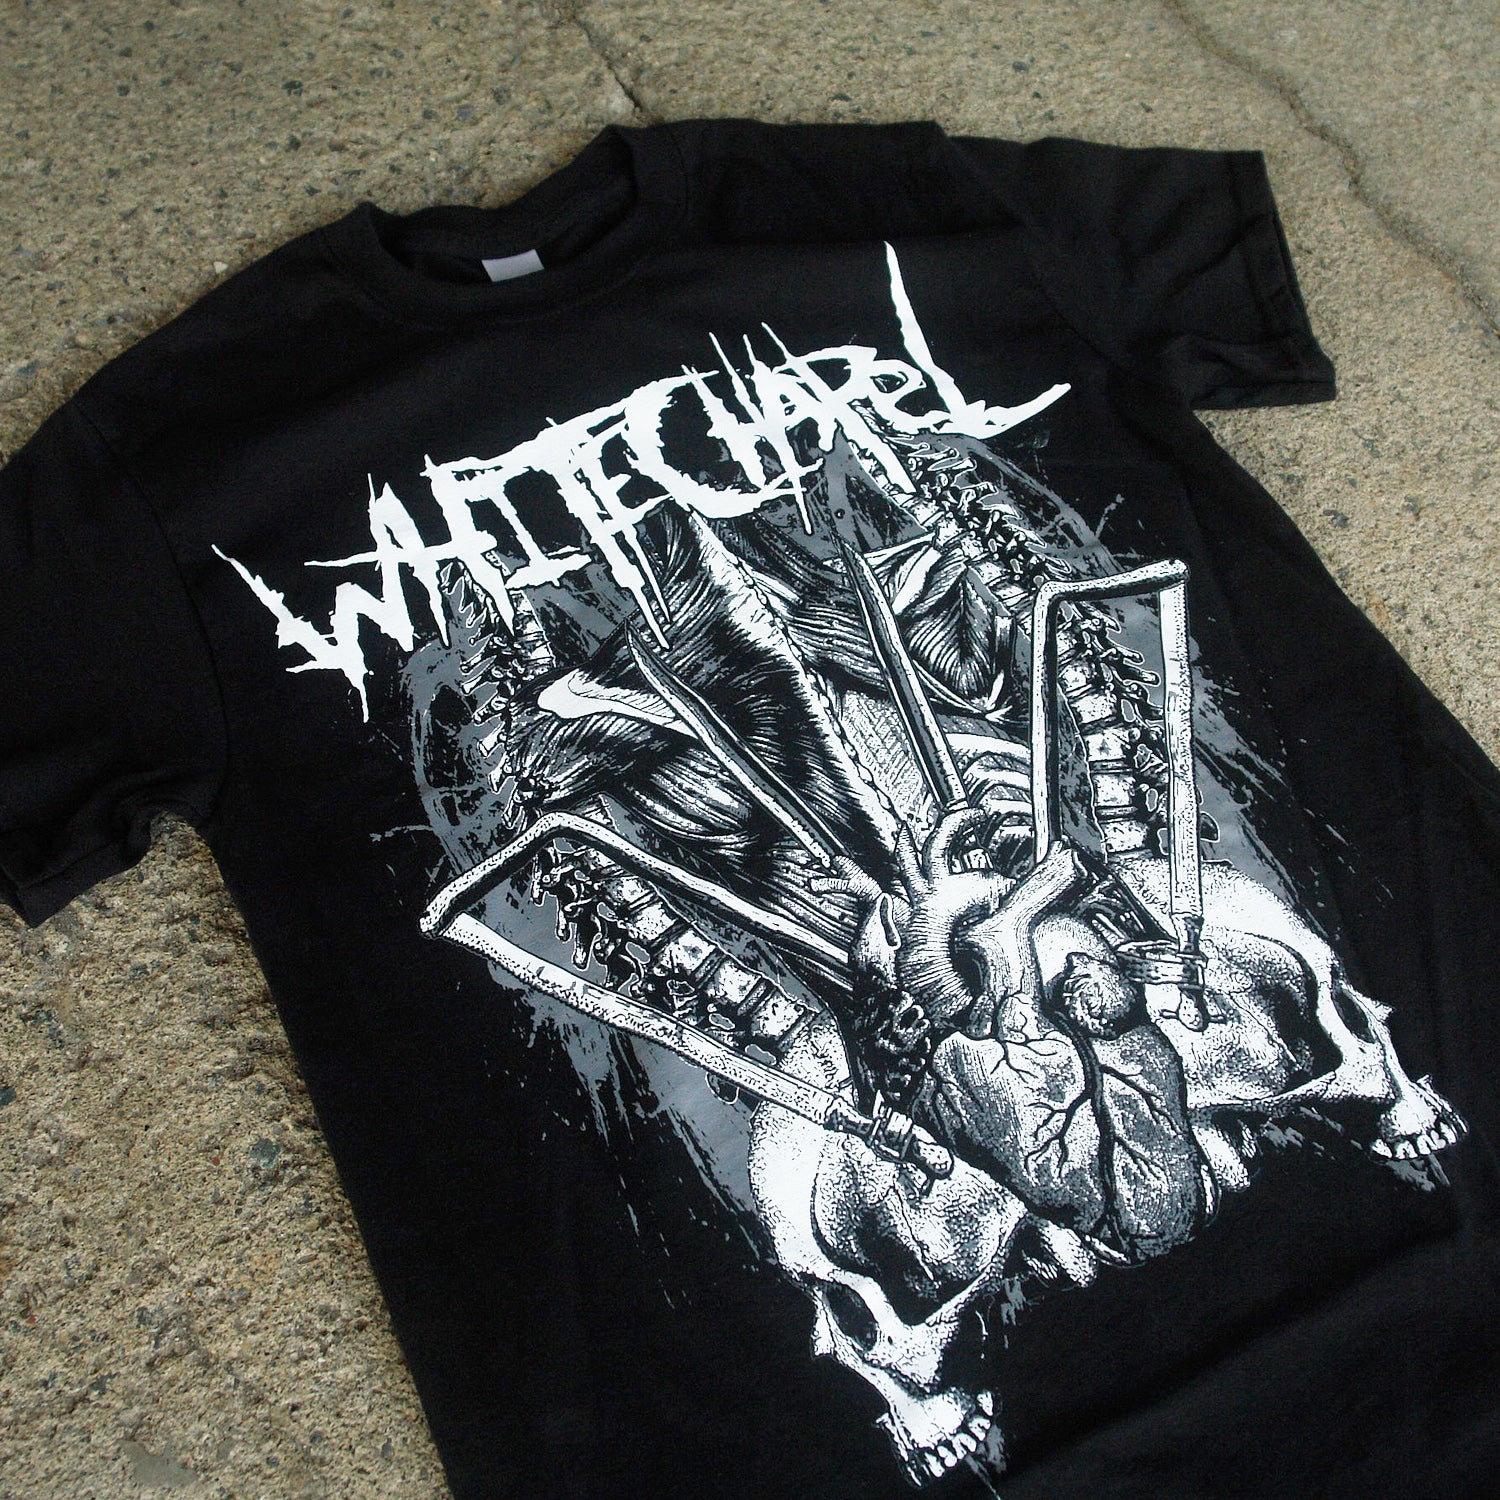 Image of the front of a black tshirt against a grey concrete background. The front of the shirt says "whitechapel" across the chest in white heavy metal style font. Below that is a white, grey, and black graphic of spines, a heart, bones, and two skeleton skulls, one facing towards the left, and the other mirrored, facing towards the right. 